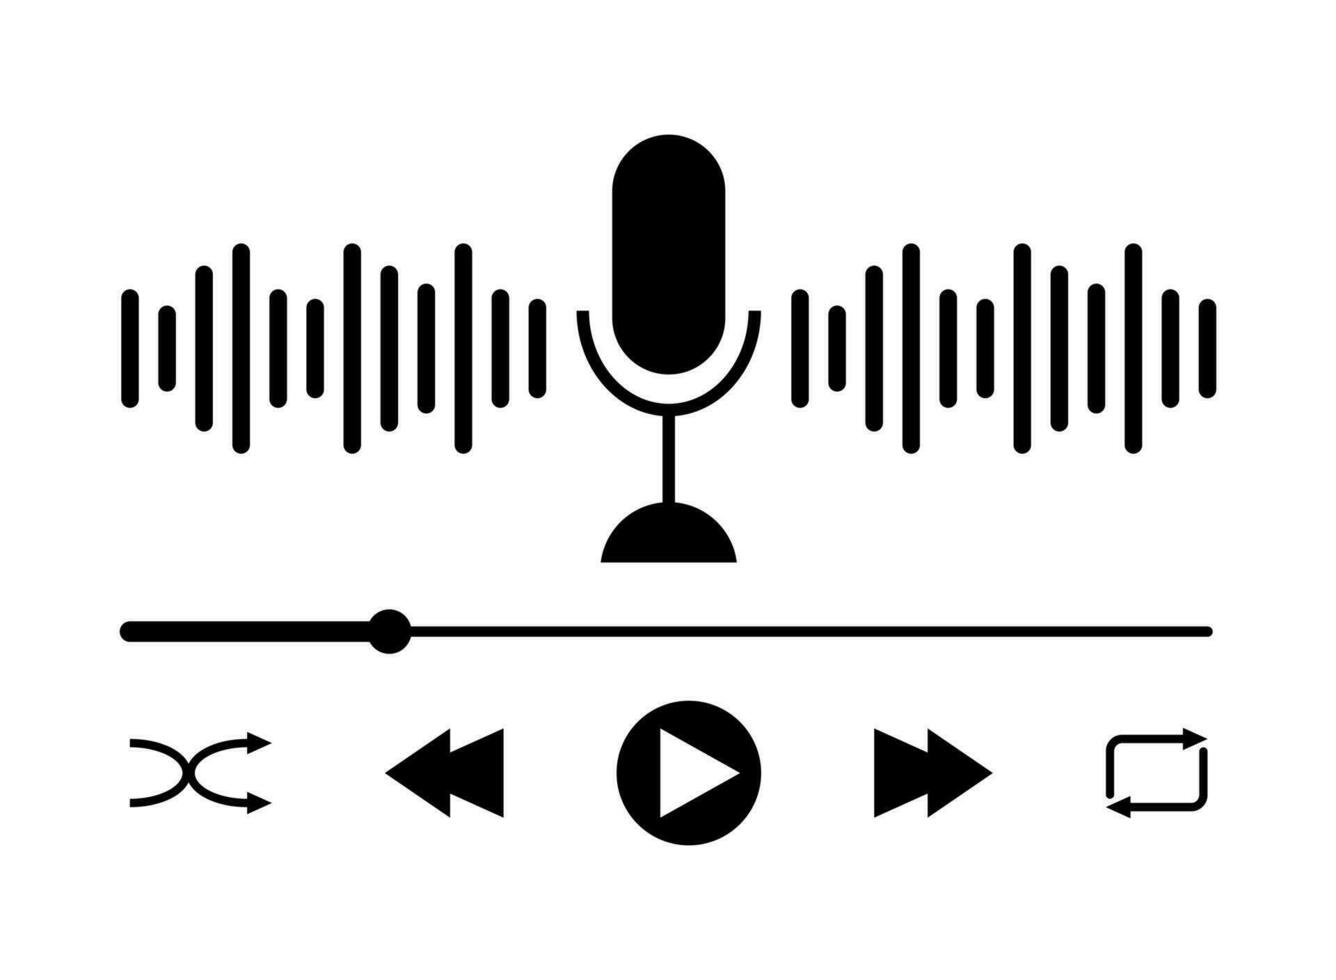 Sound wave icon, podcast player interface, music symbol, sound wave, loading progress bar and buttons. Microphone sound wave vector illustration.